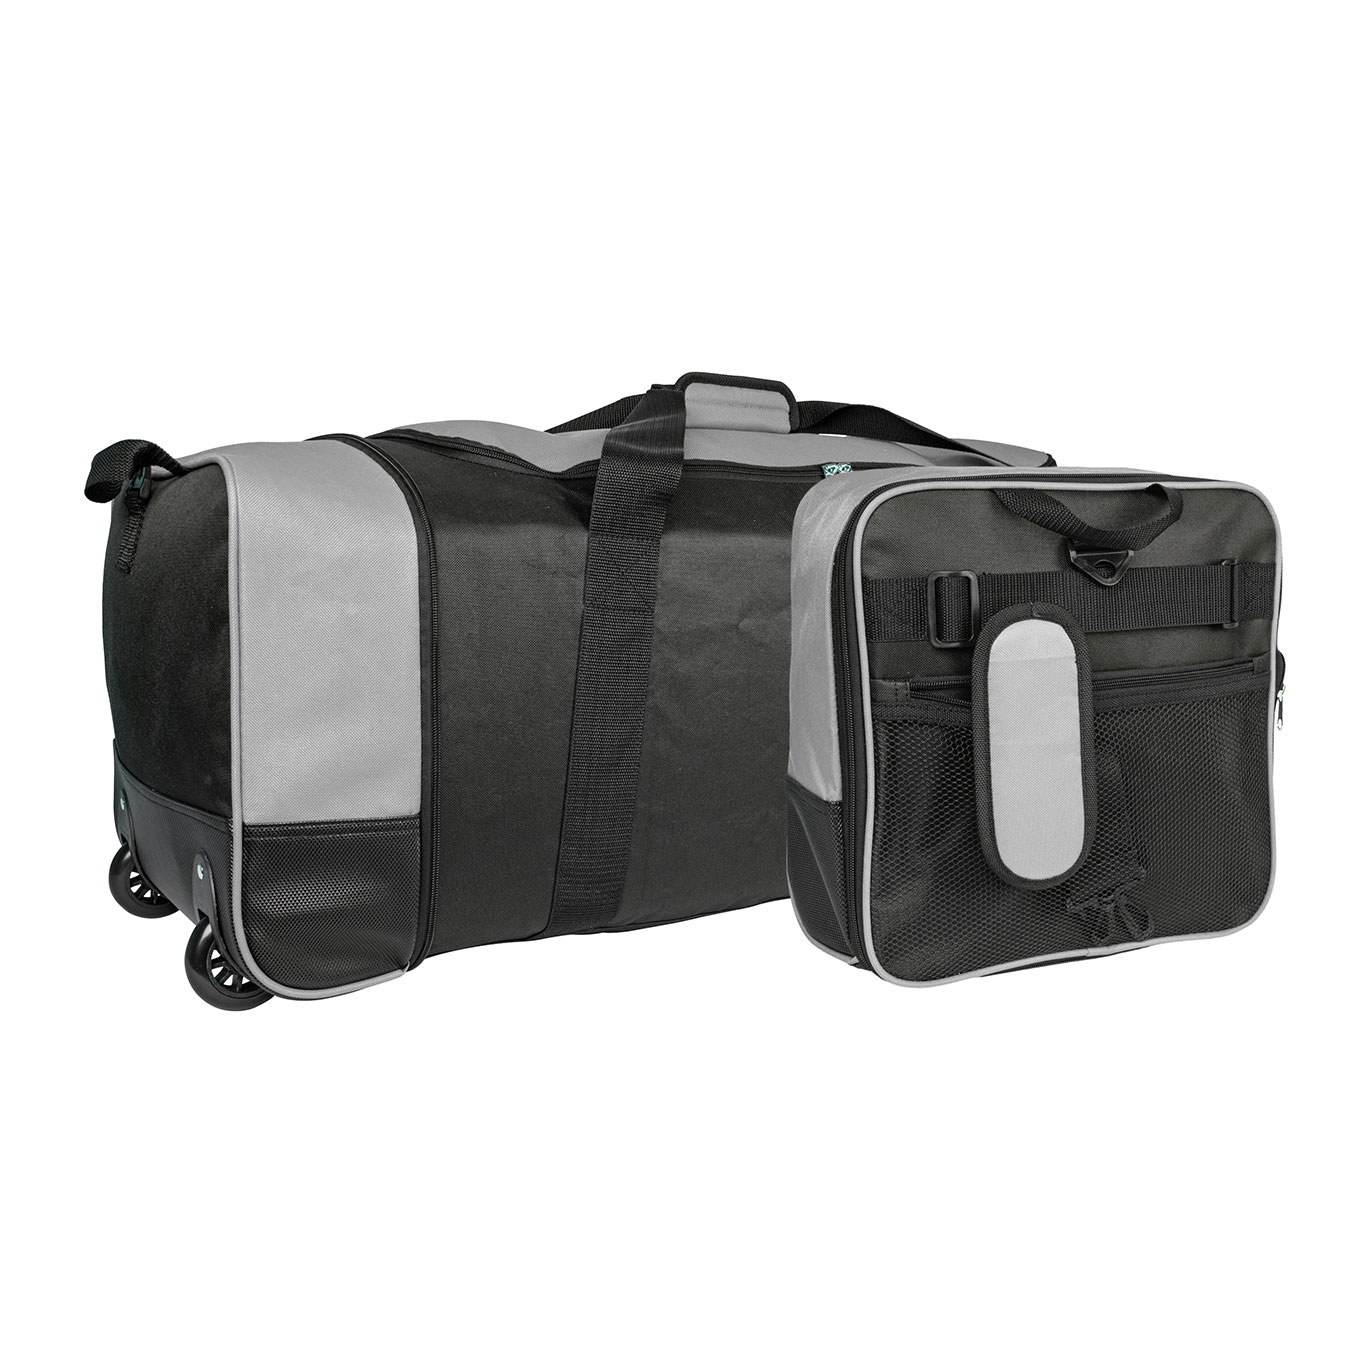 An image of iN Travel Foldable Wheeled Holdall - 80L Luggage Bag (Black/Grey)